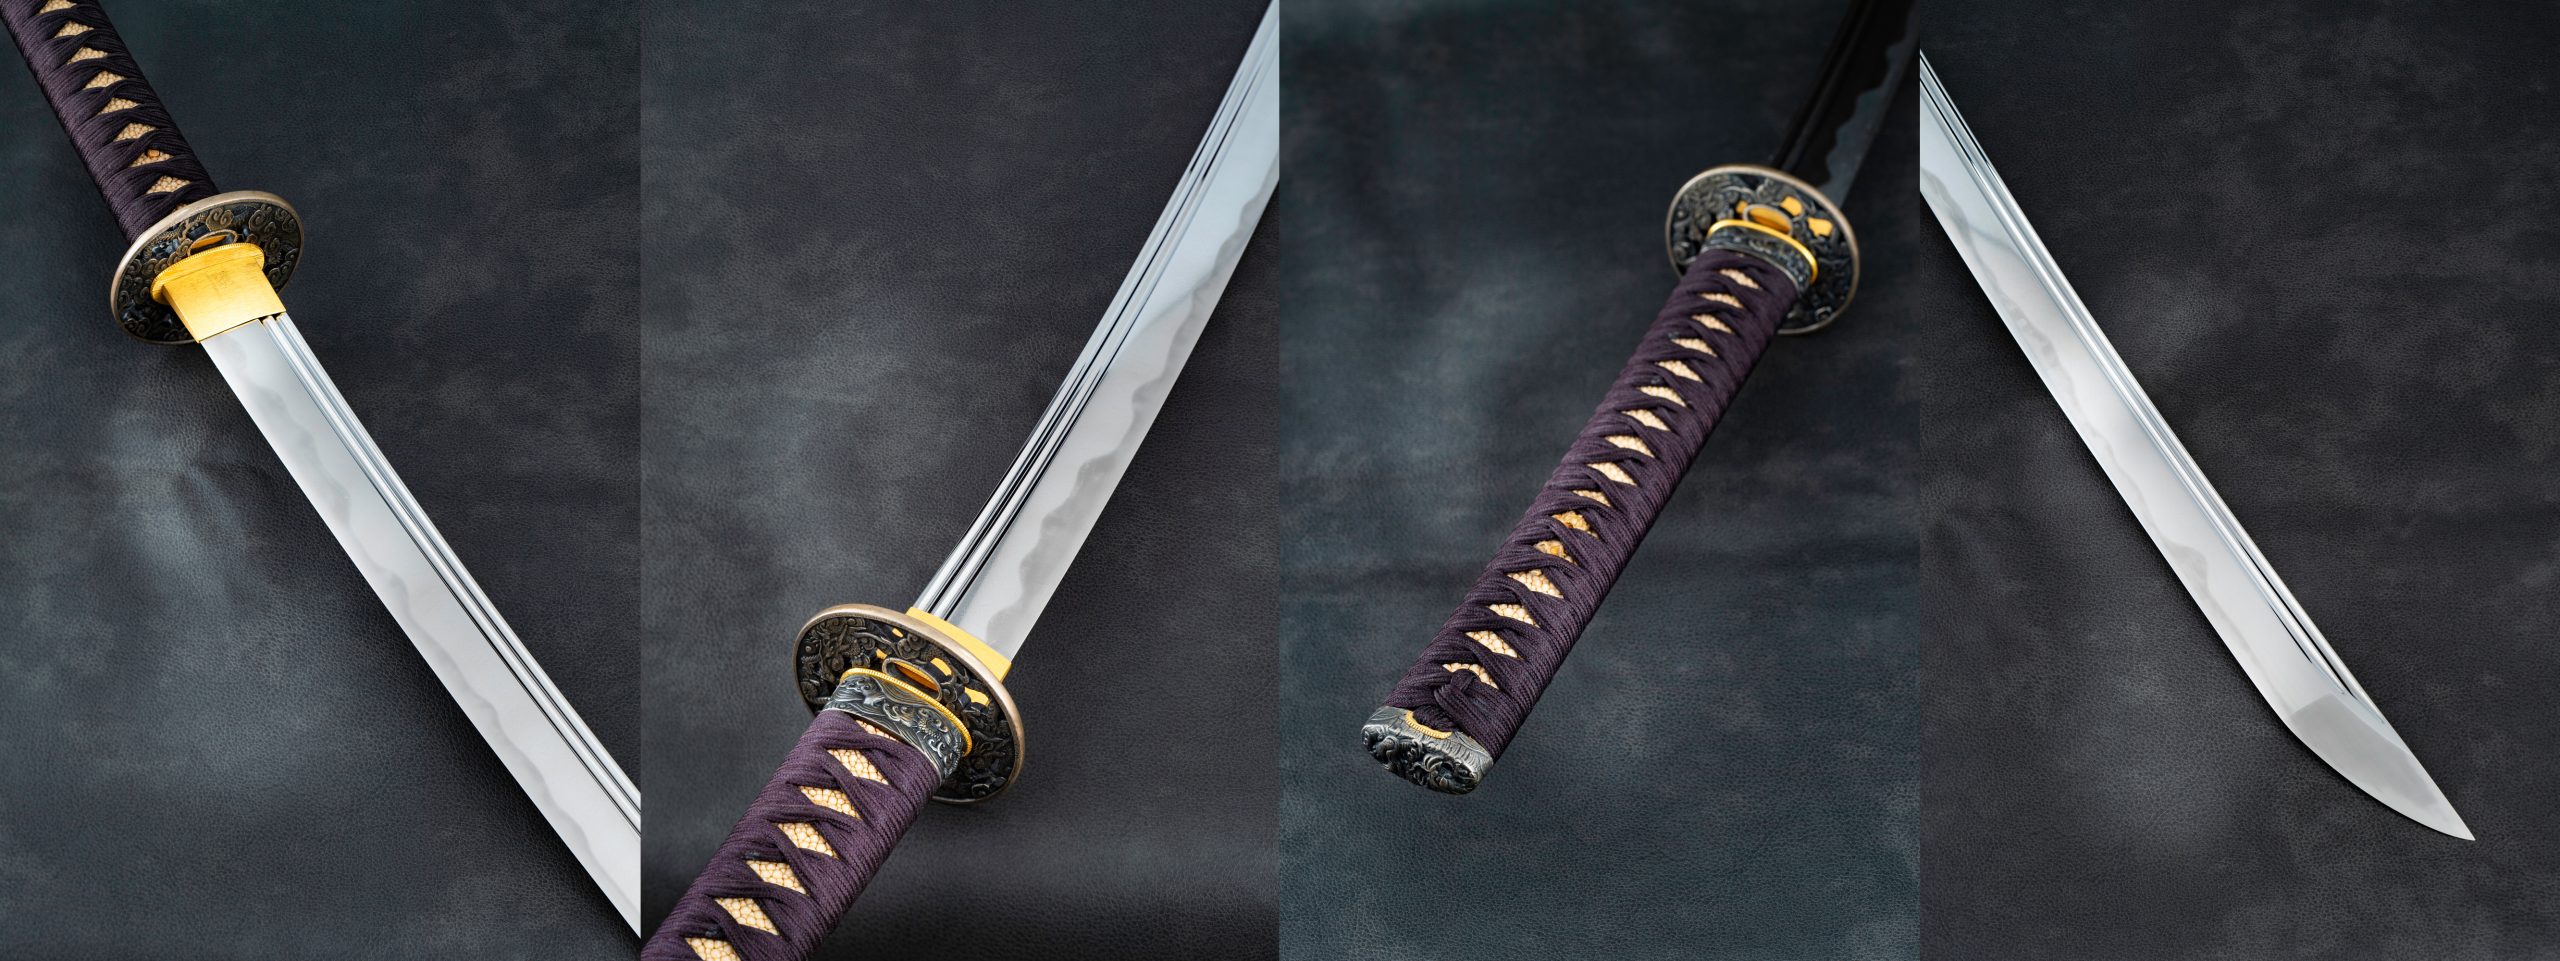 Which Japanese Sword to buy and accessories to go with it